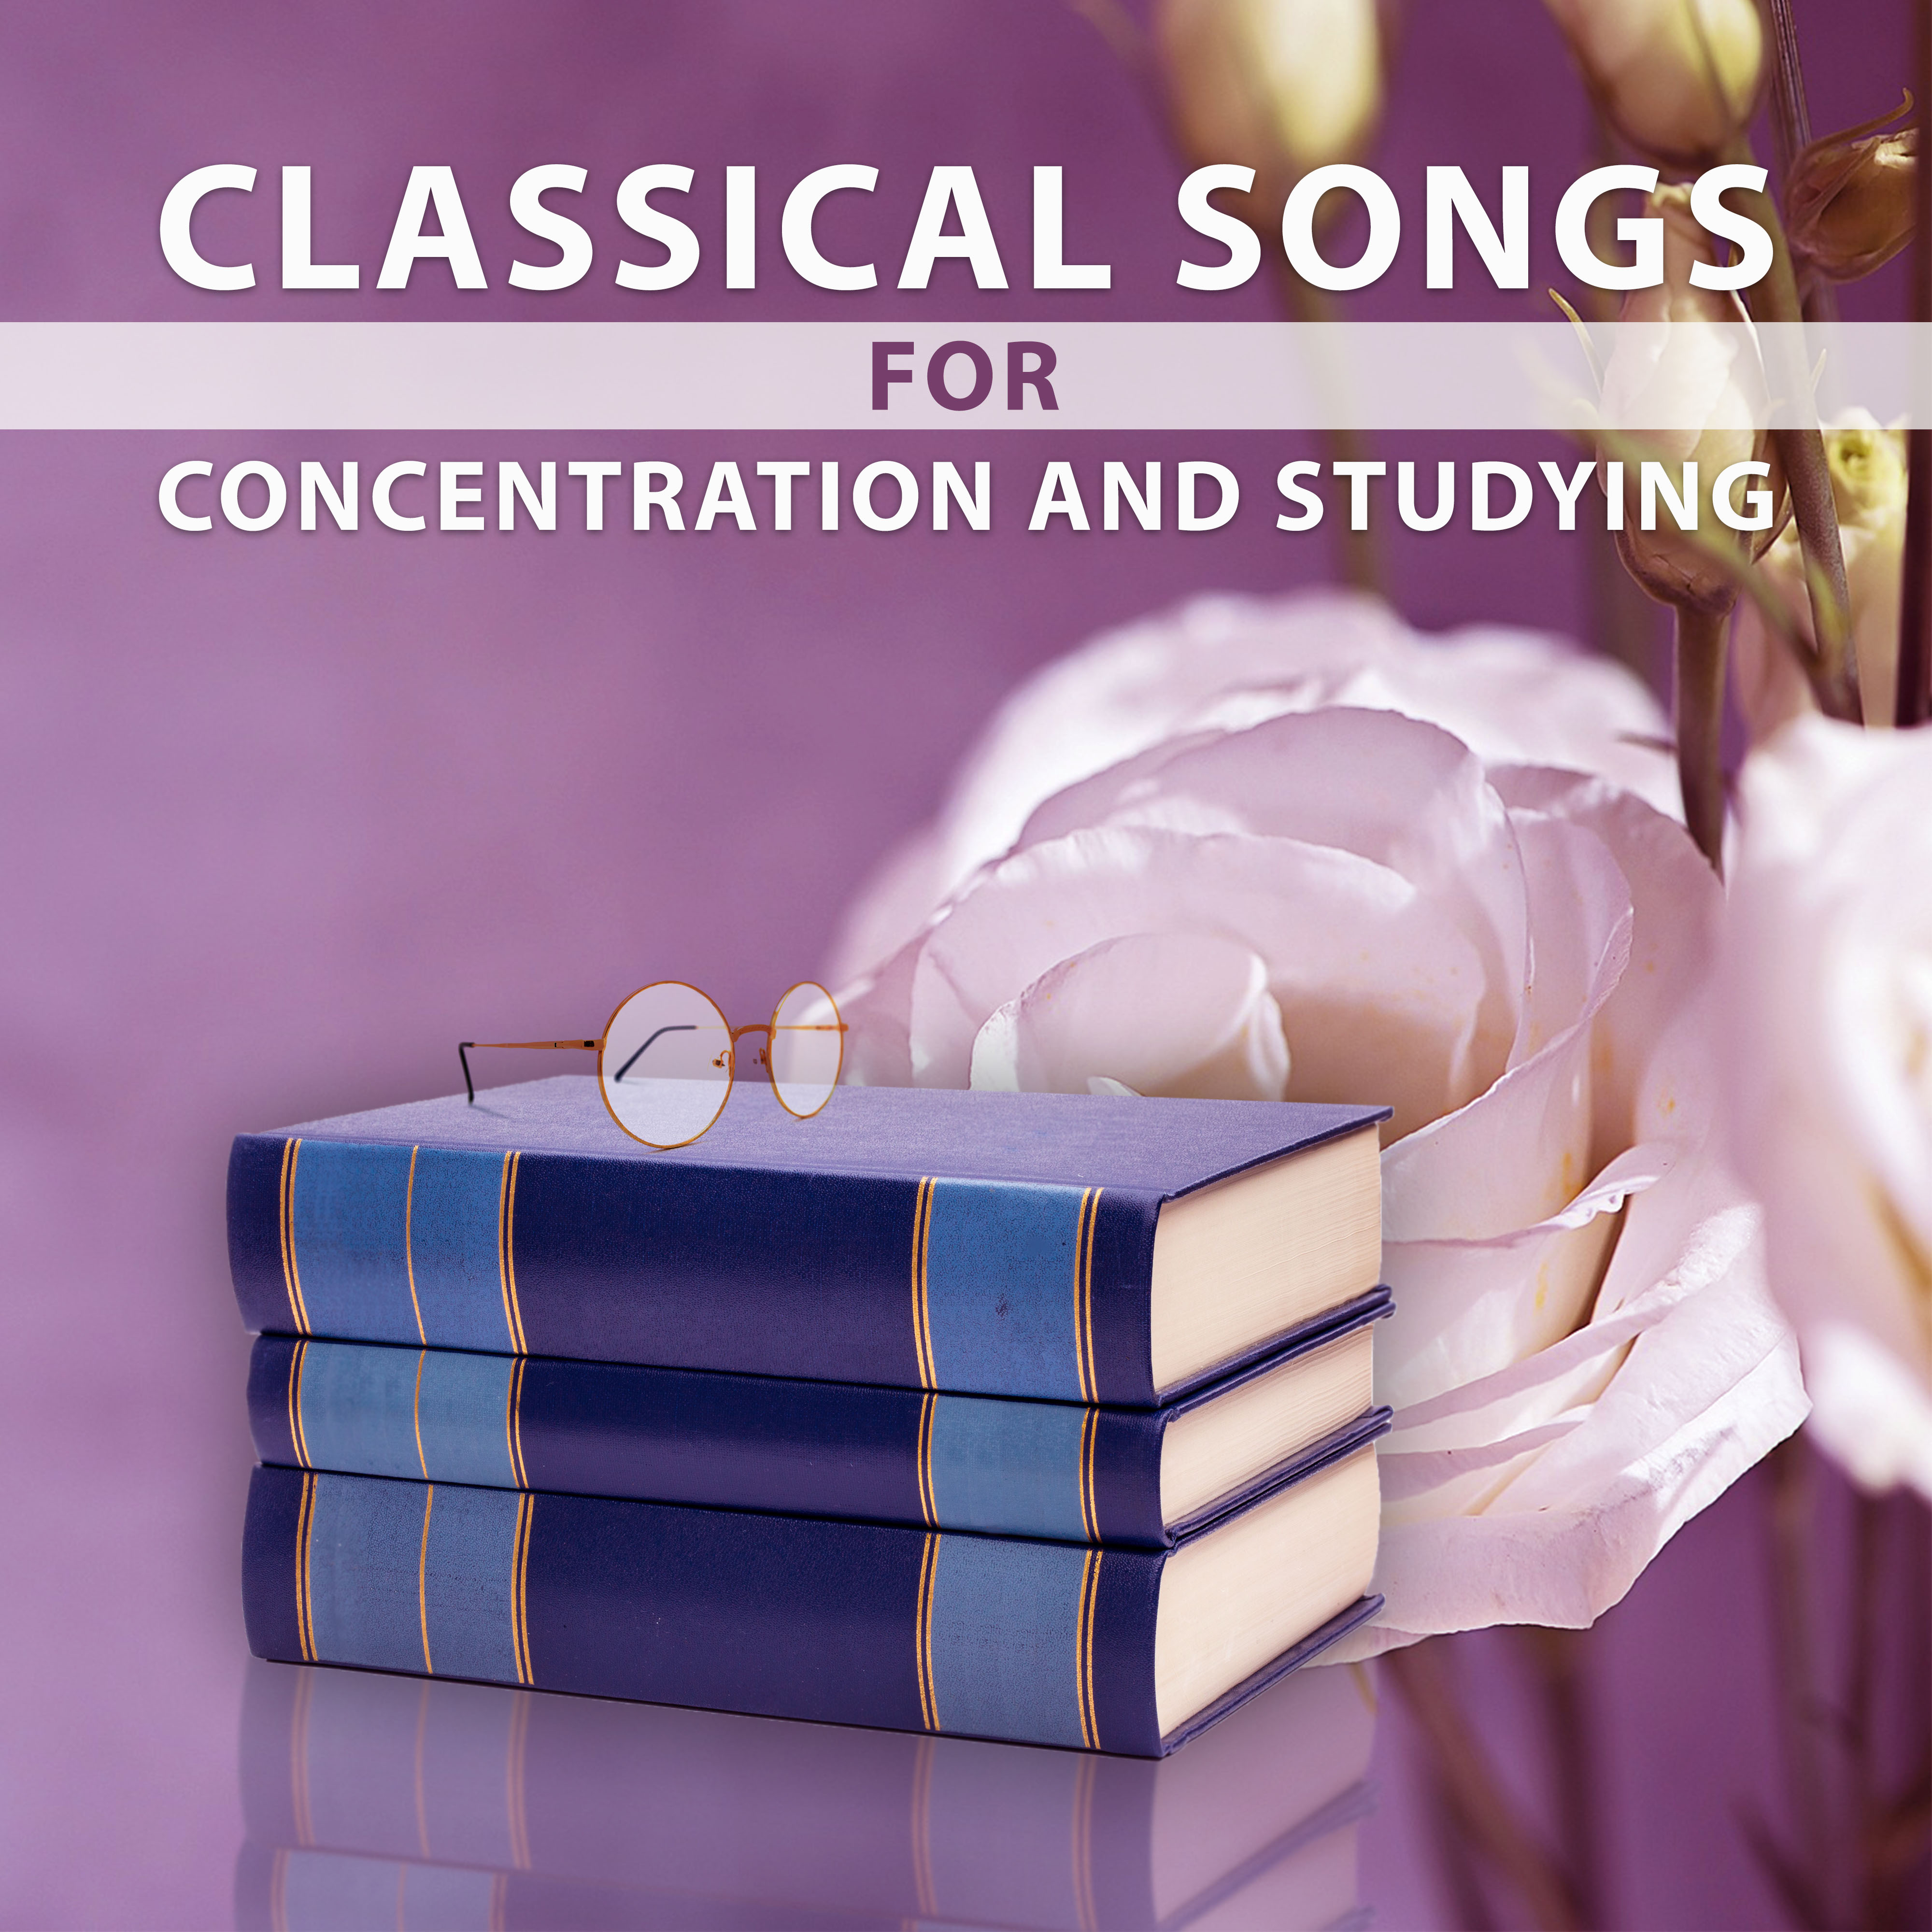 Classical Songs to Concentration and Study – Classical Composers to Study, Music to Listening, Concentration Music, Composers to Work, Effective Learning, Mozart, Beethoven